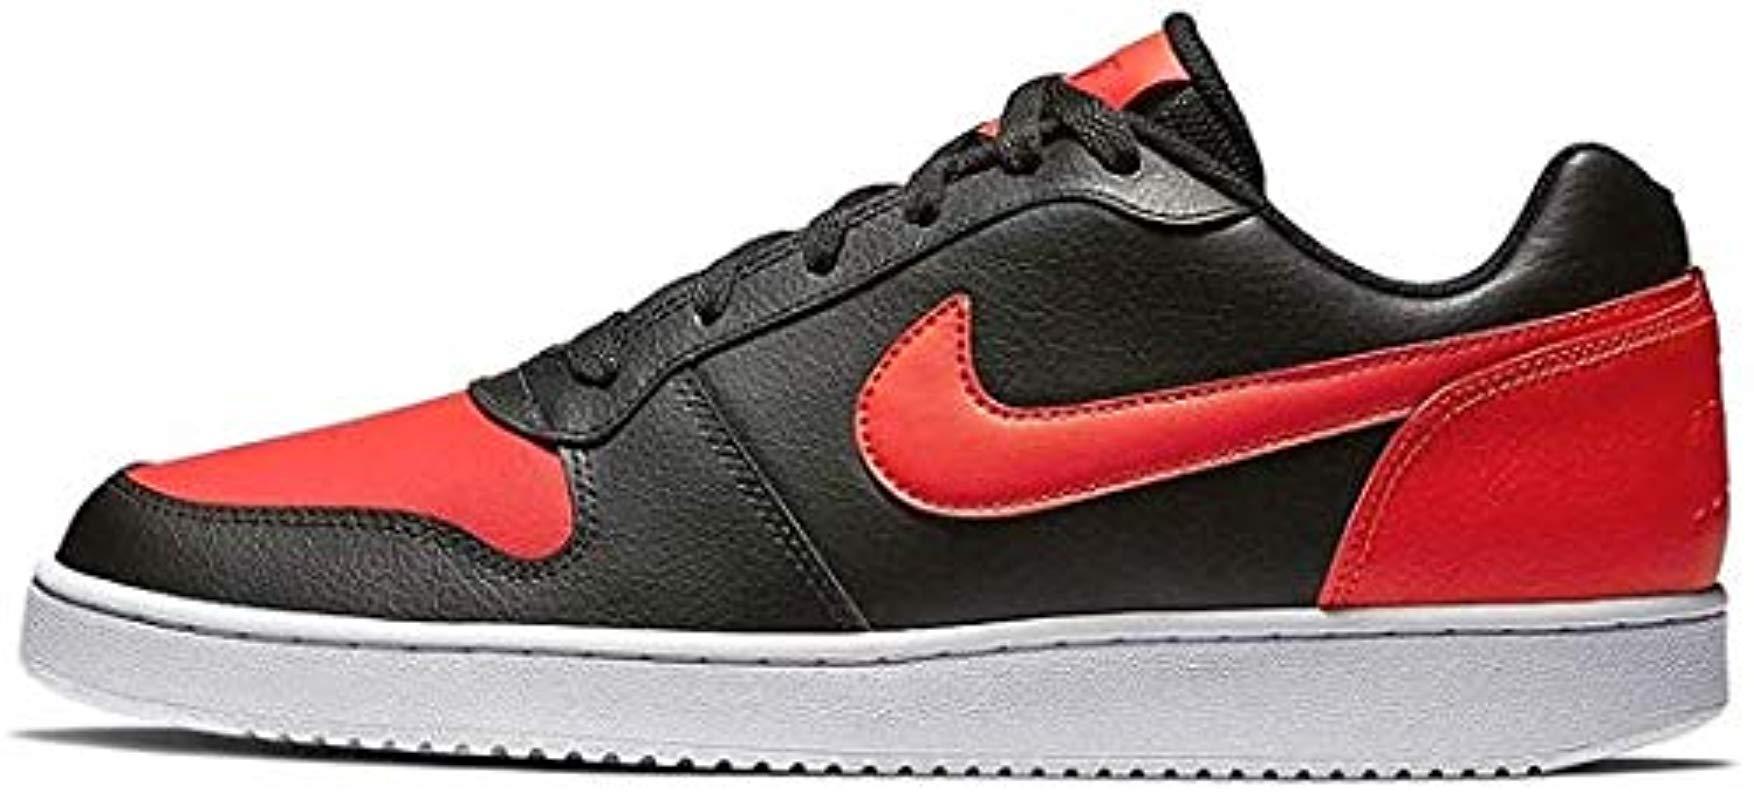 nike ebernon low black and red